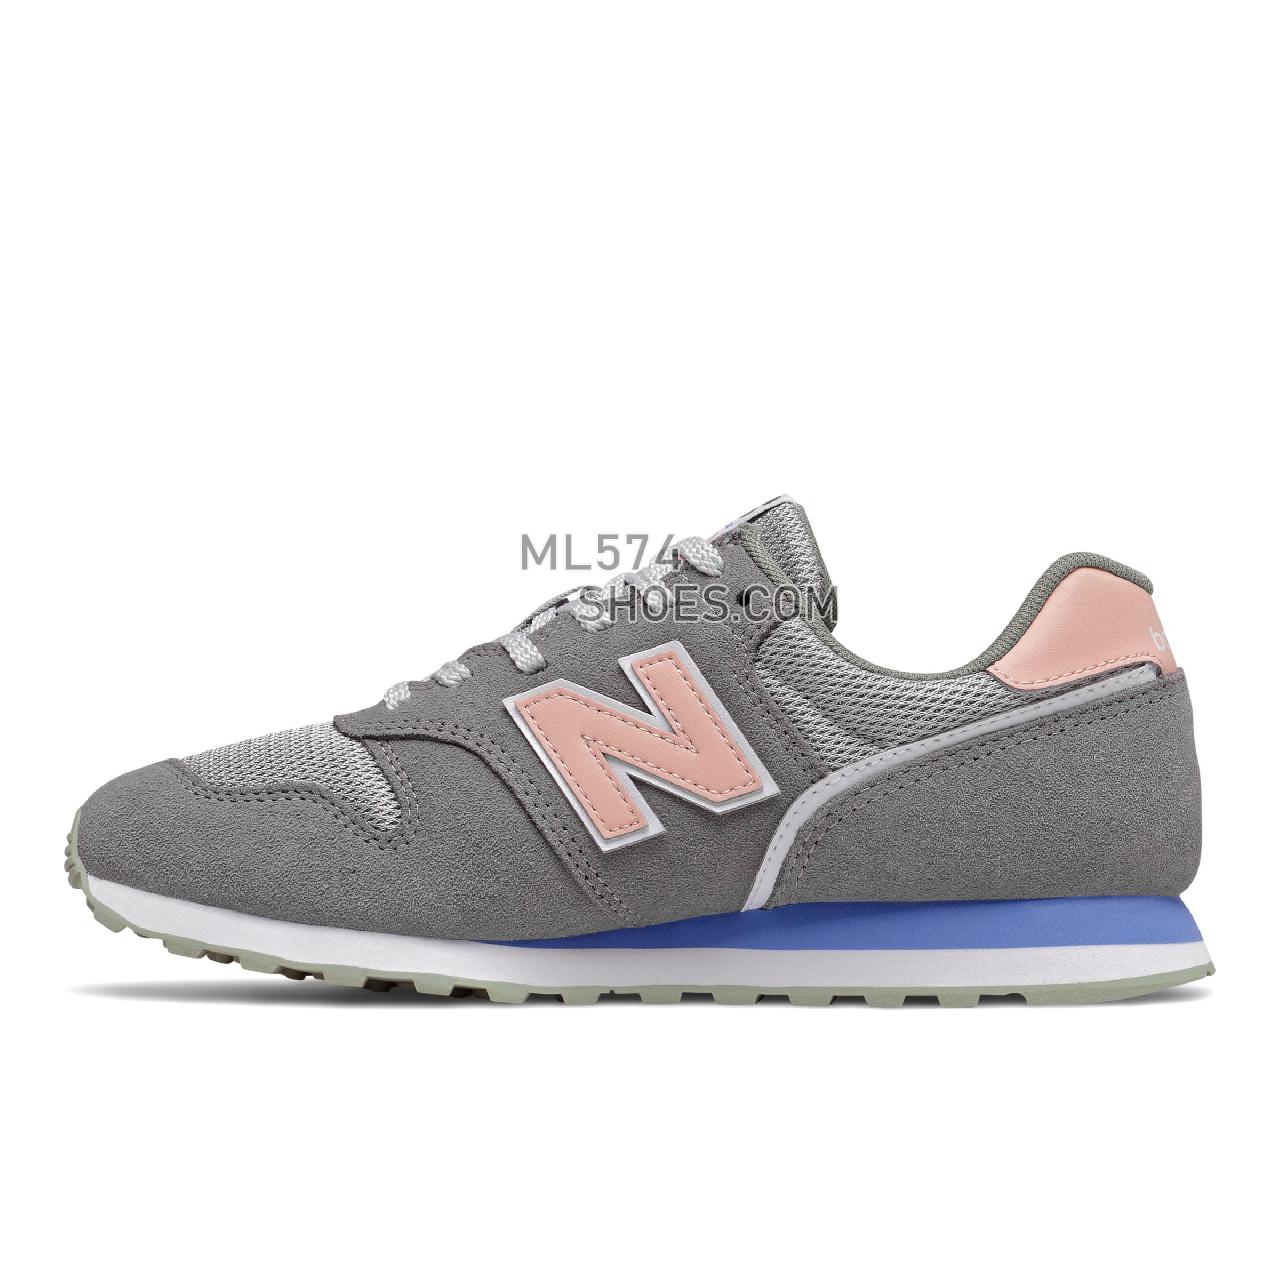 New Balance WL373 - Women's Classic Sneakers - Castlerock with Rose Water - WL373CO2